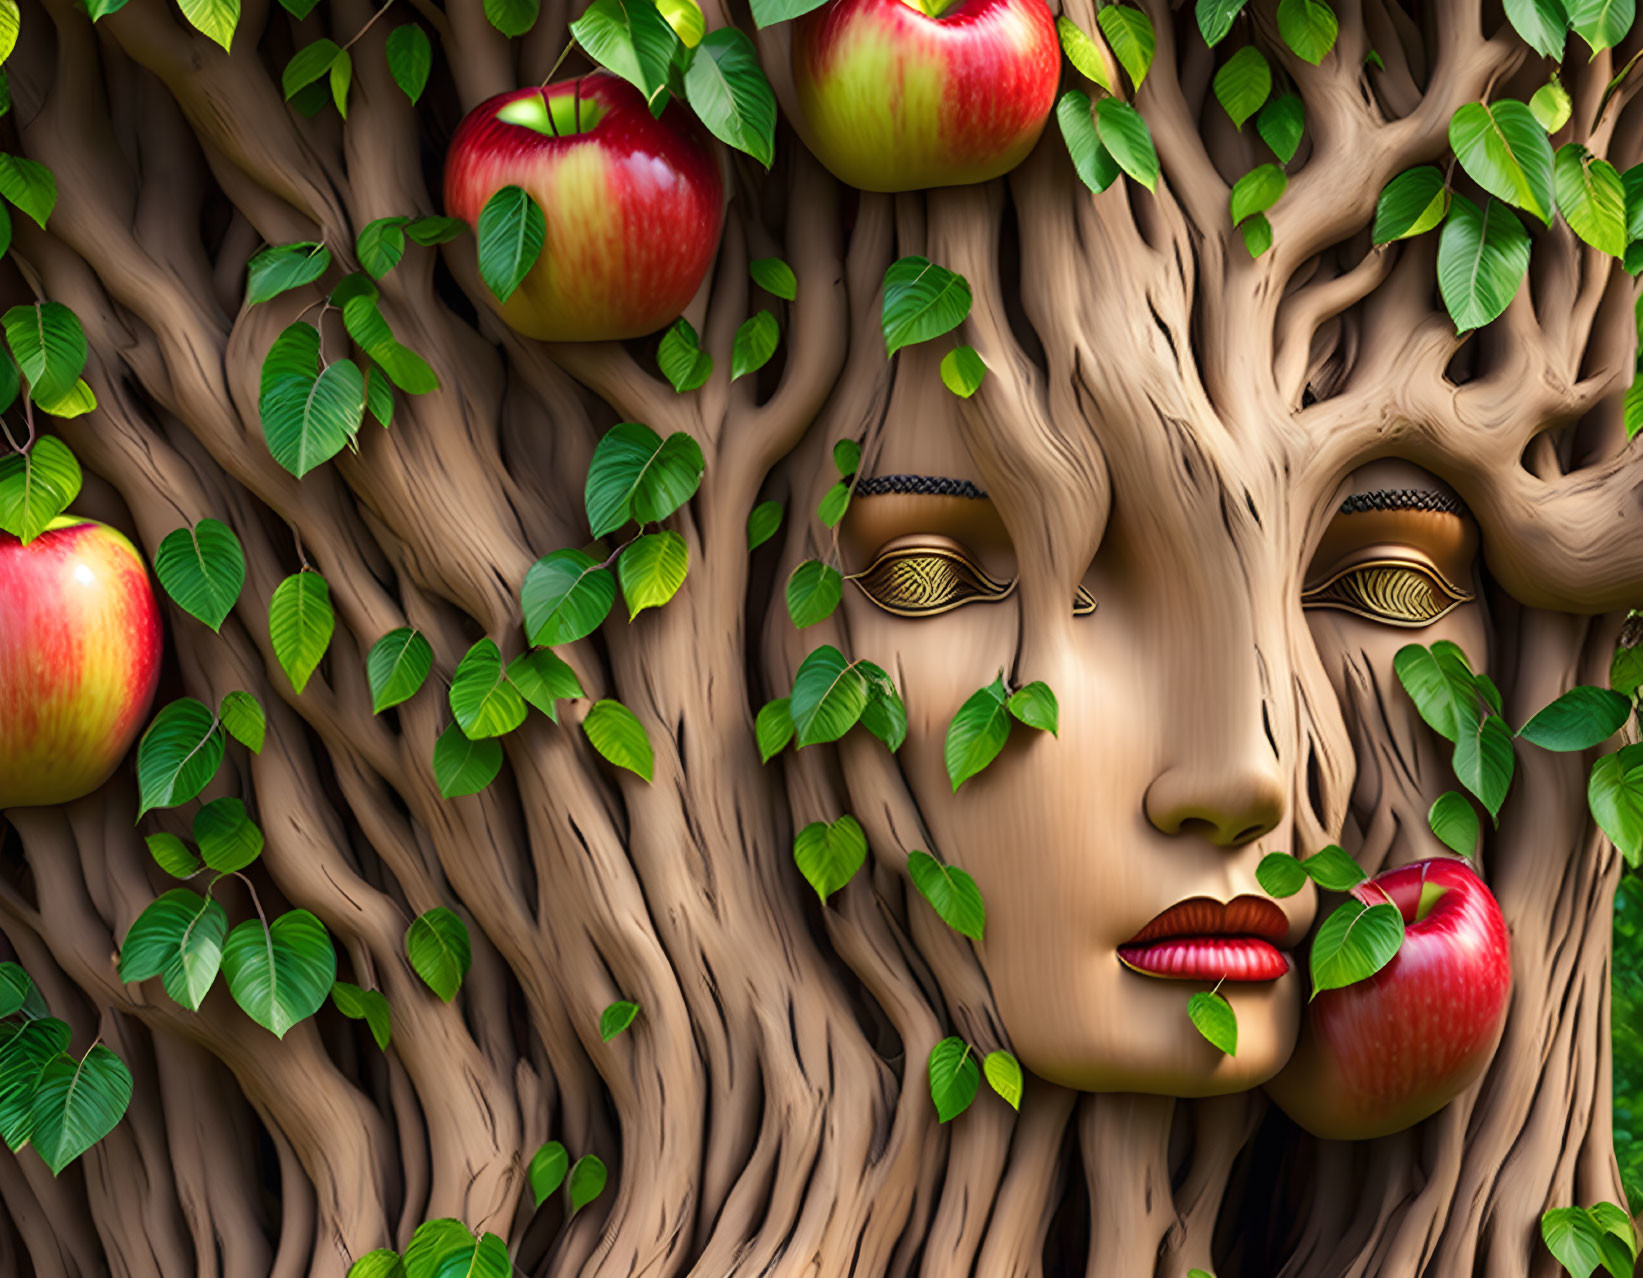 Tree with woman's face, red apples, and green leaves in artistic representation